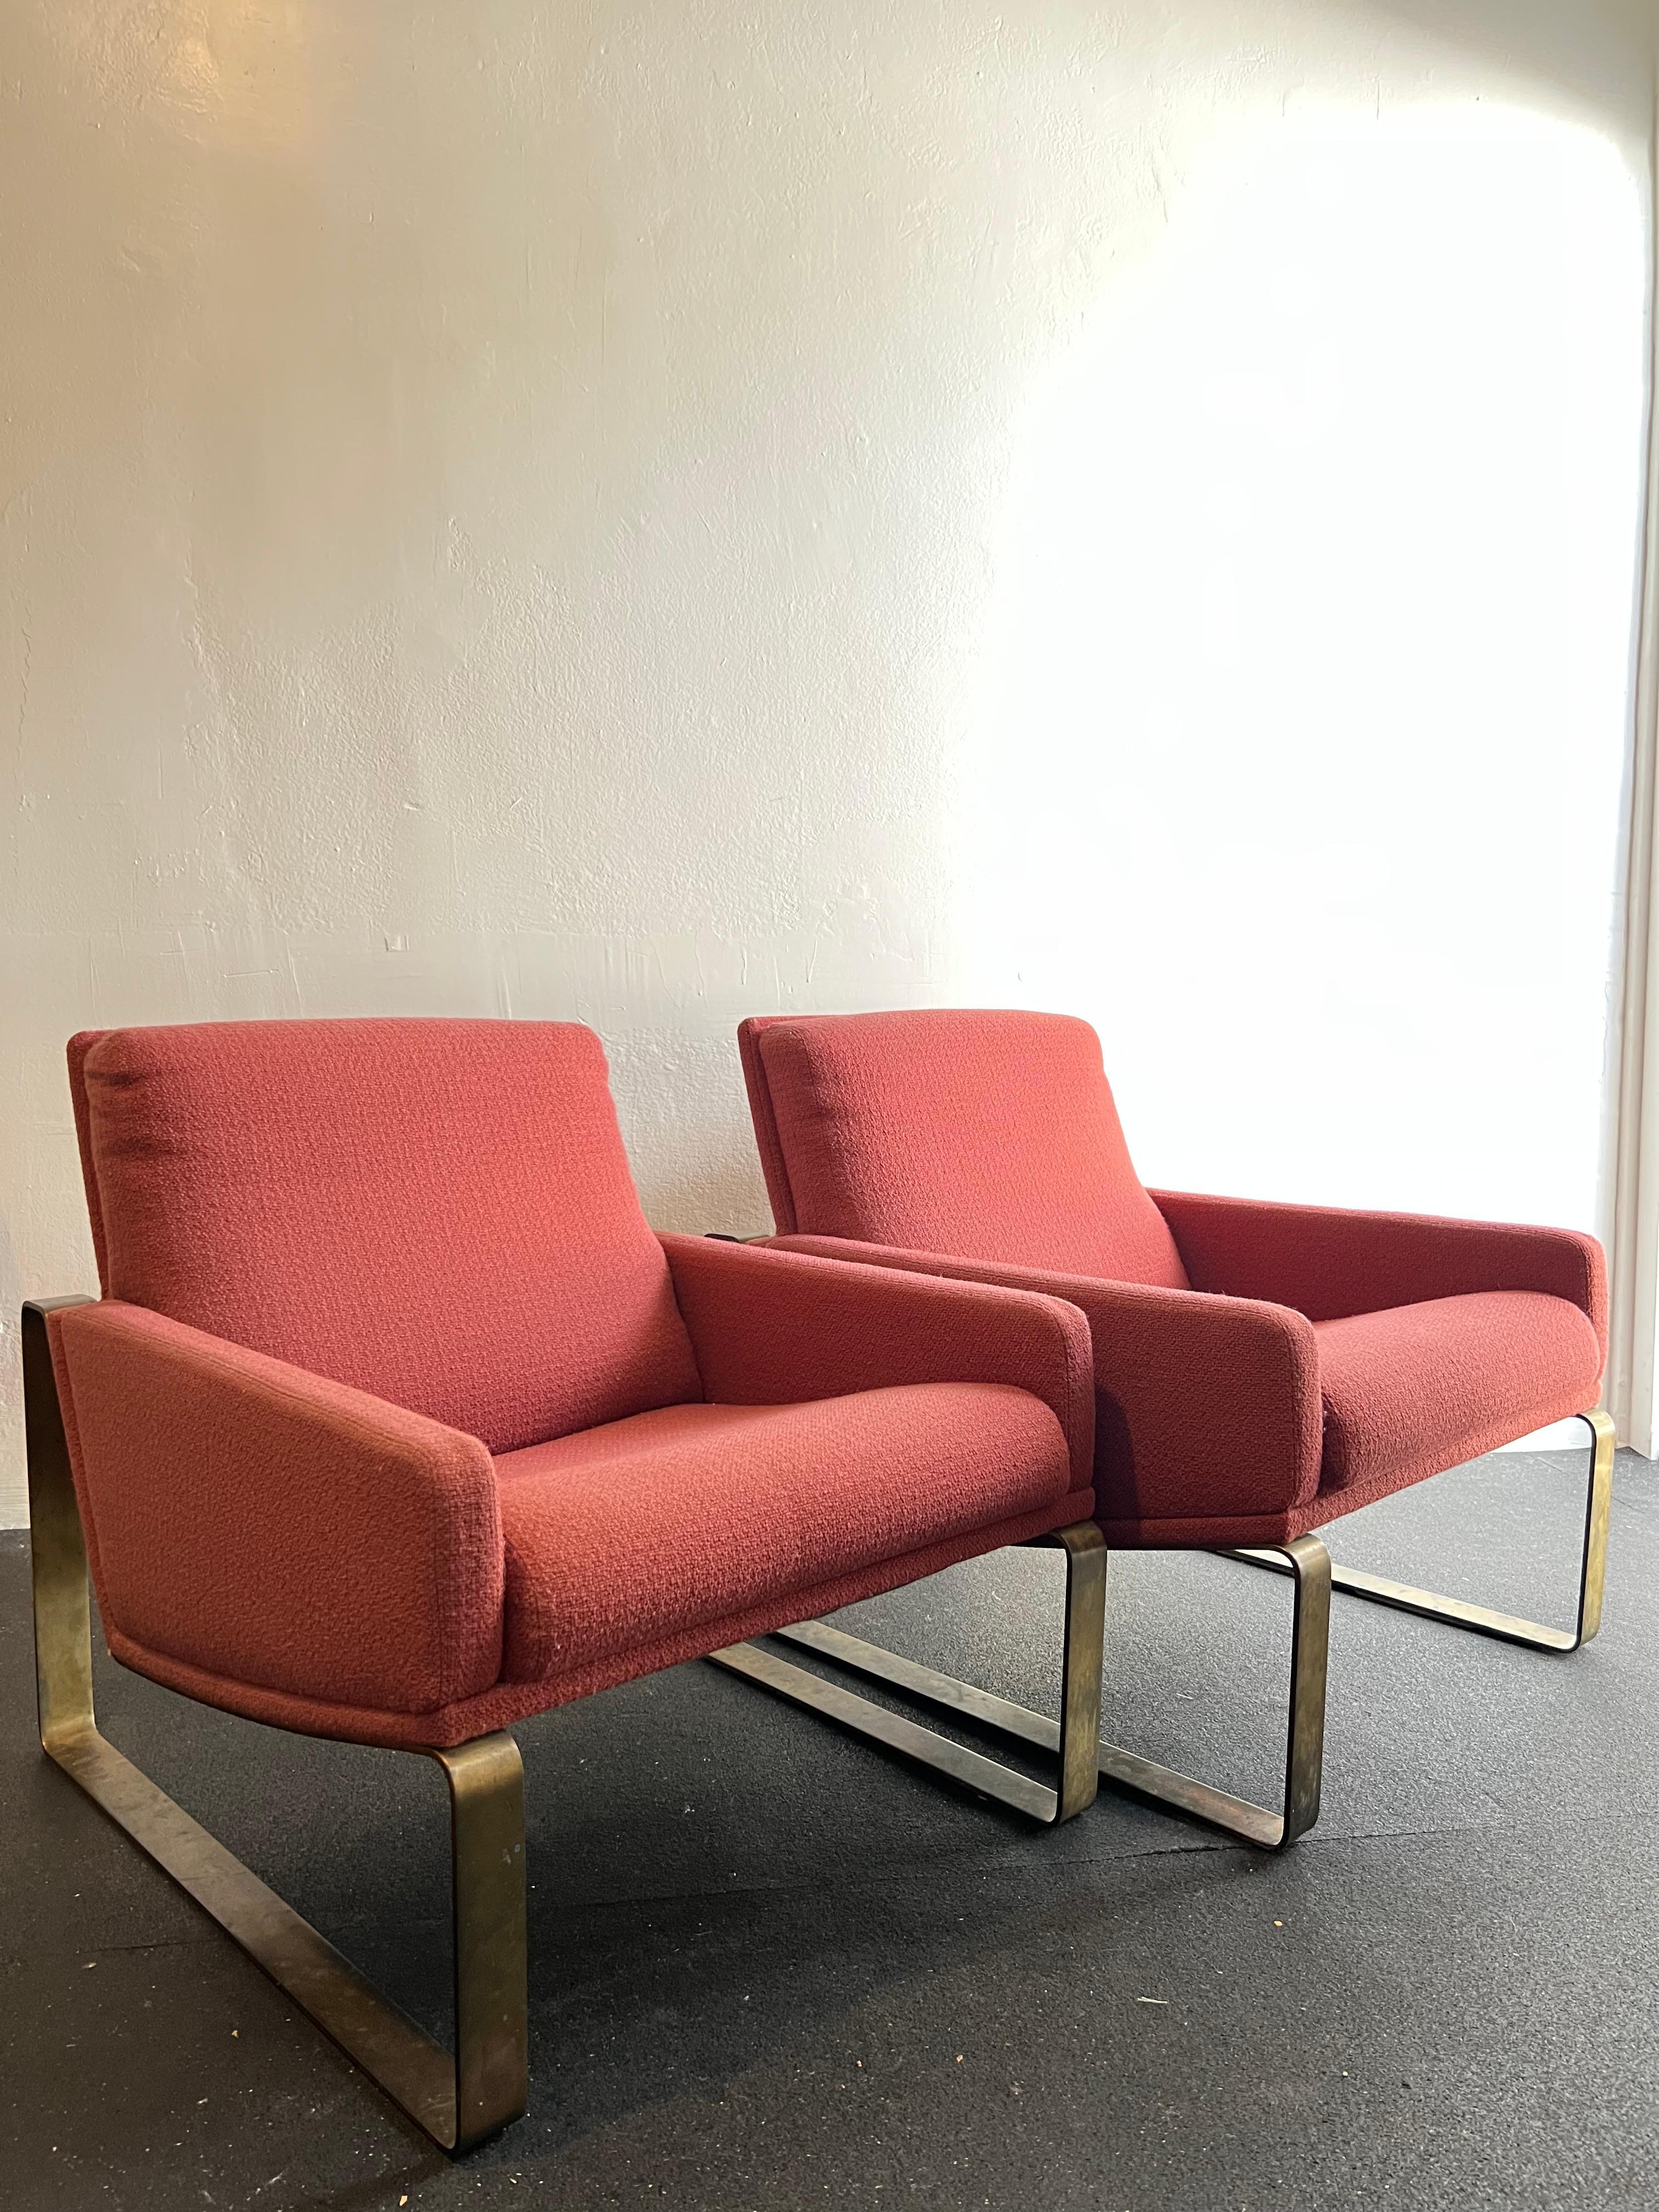 Pair of patinated bronze frame lounge chairs. Reupholstery is highly recommended. Beautiful patina throughout the bronze frames with slight loss underneath due to contact with ground (please refer to photos). Additional photos available upon